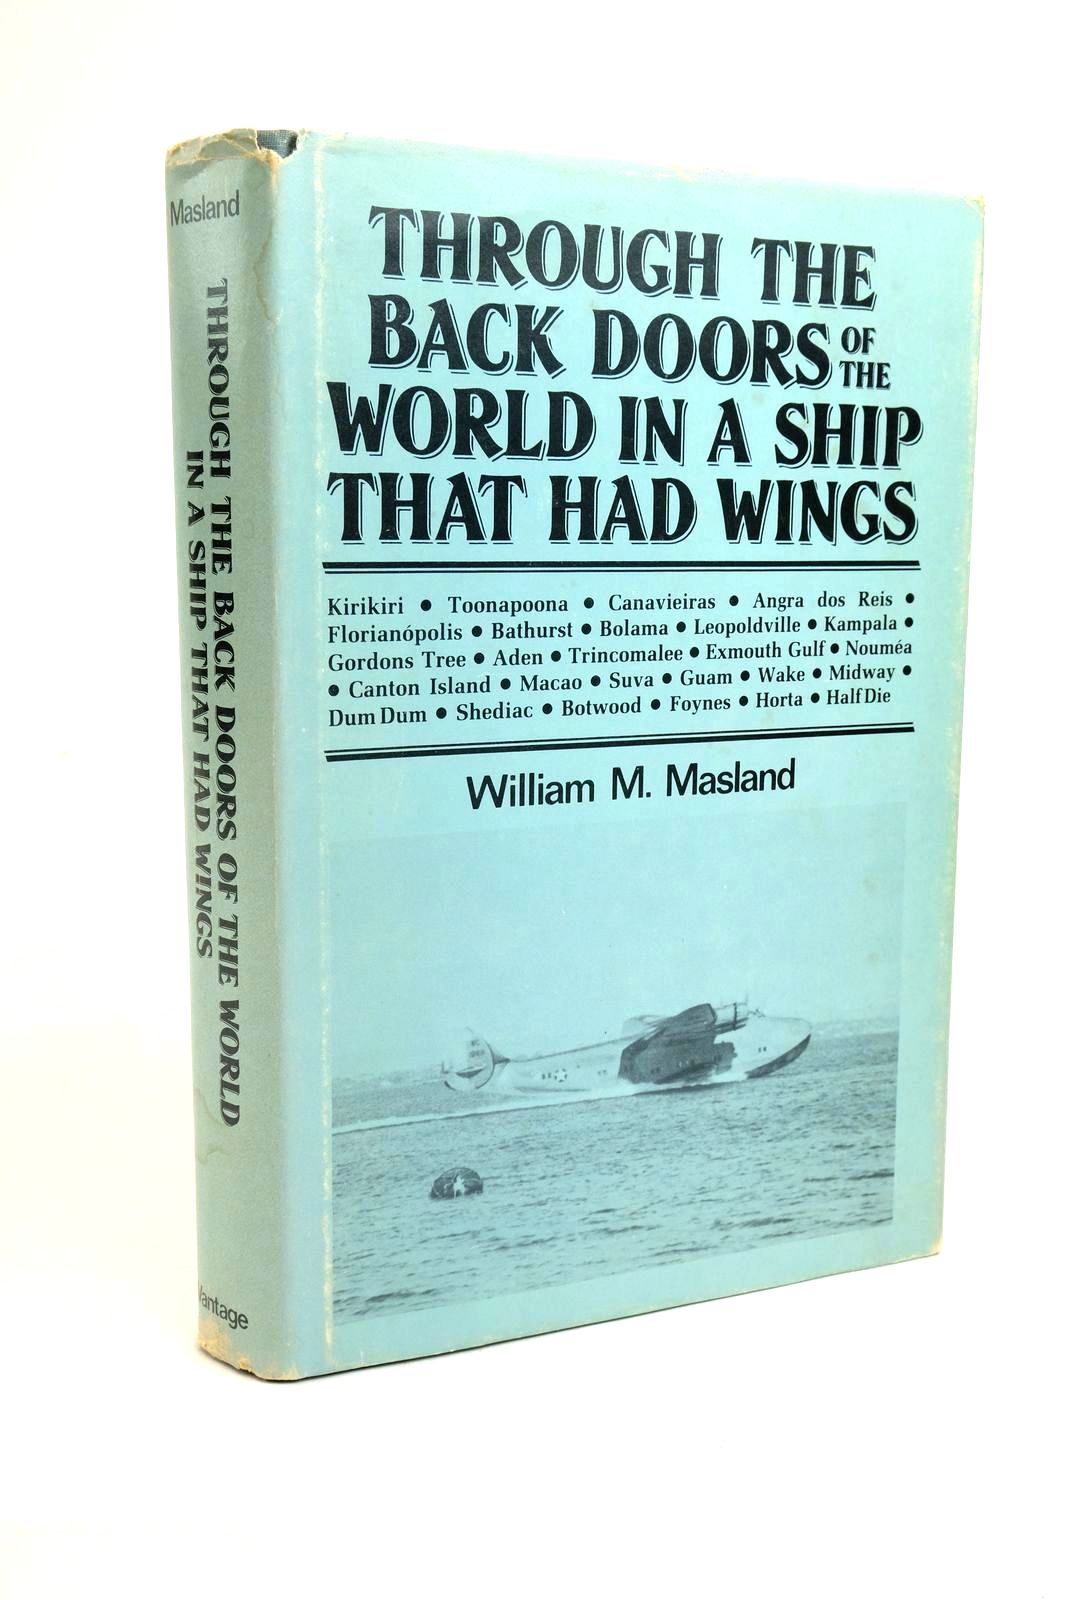 Photo of THROUGH THE BACK DOORS OF THE WORLD IN A SHIP THAT HAD WINGS written by Masland, William M. published by Vantage Press (STOCK CODE: 1322294)  for sale by Stella & Rose's Books